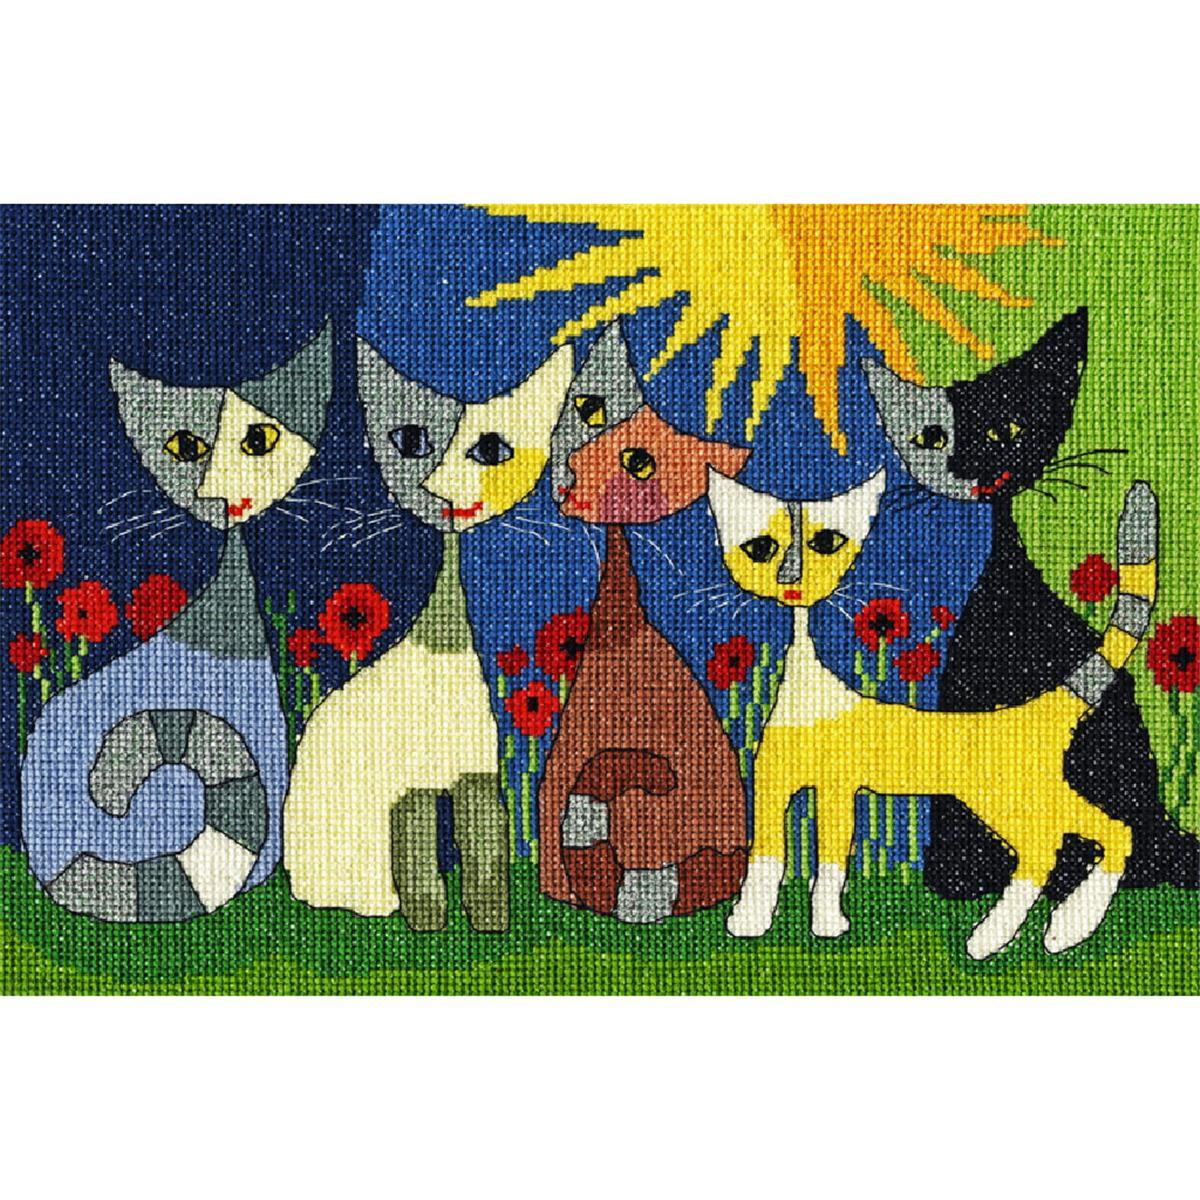 A vibrant work of art shows five stylized, colourful cats...